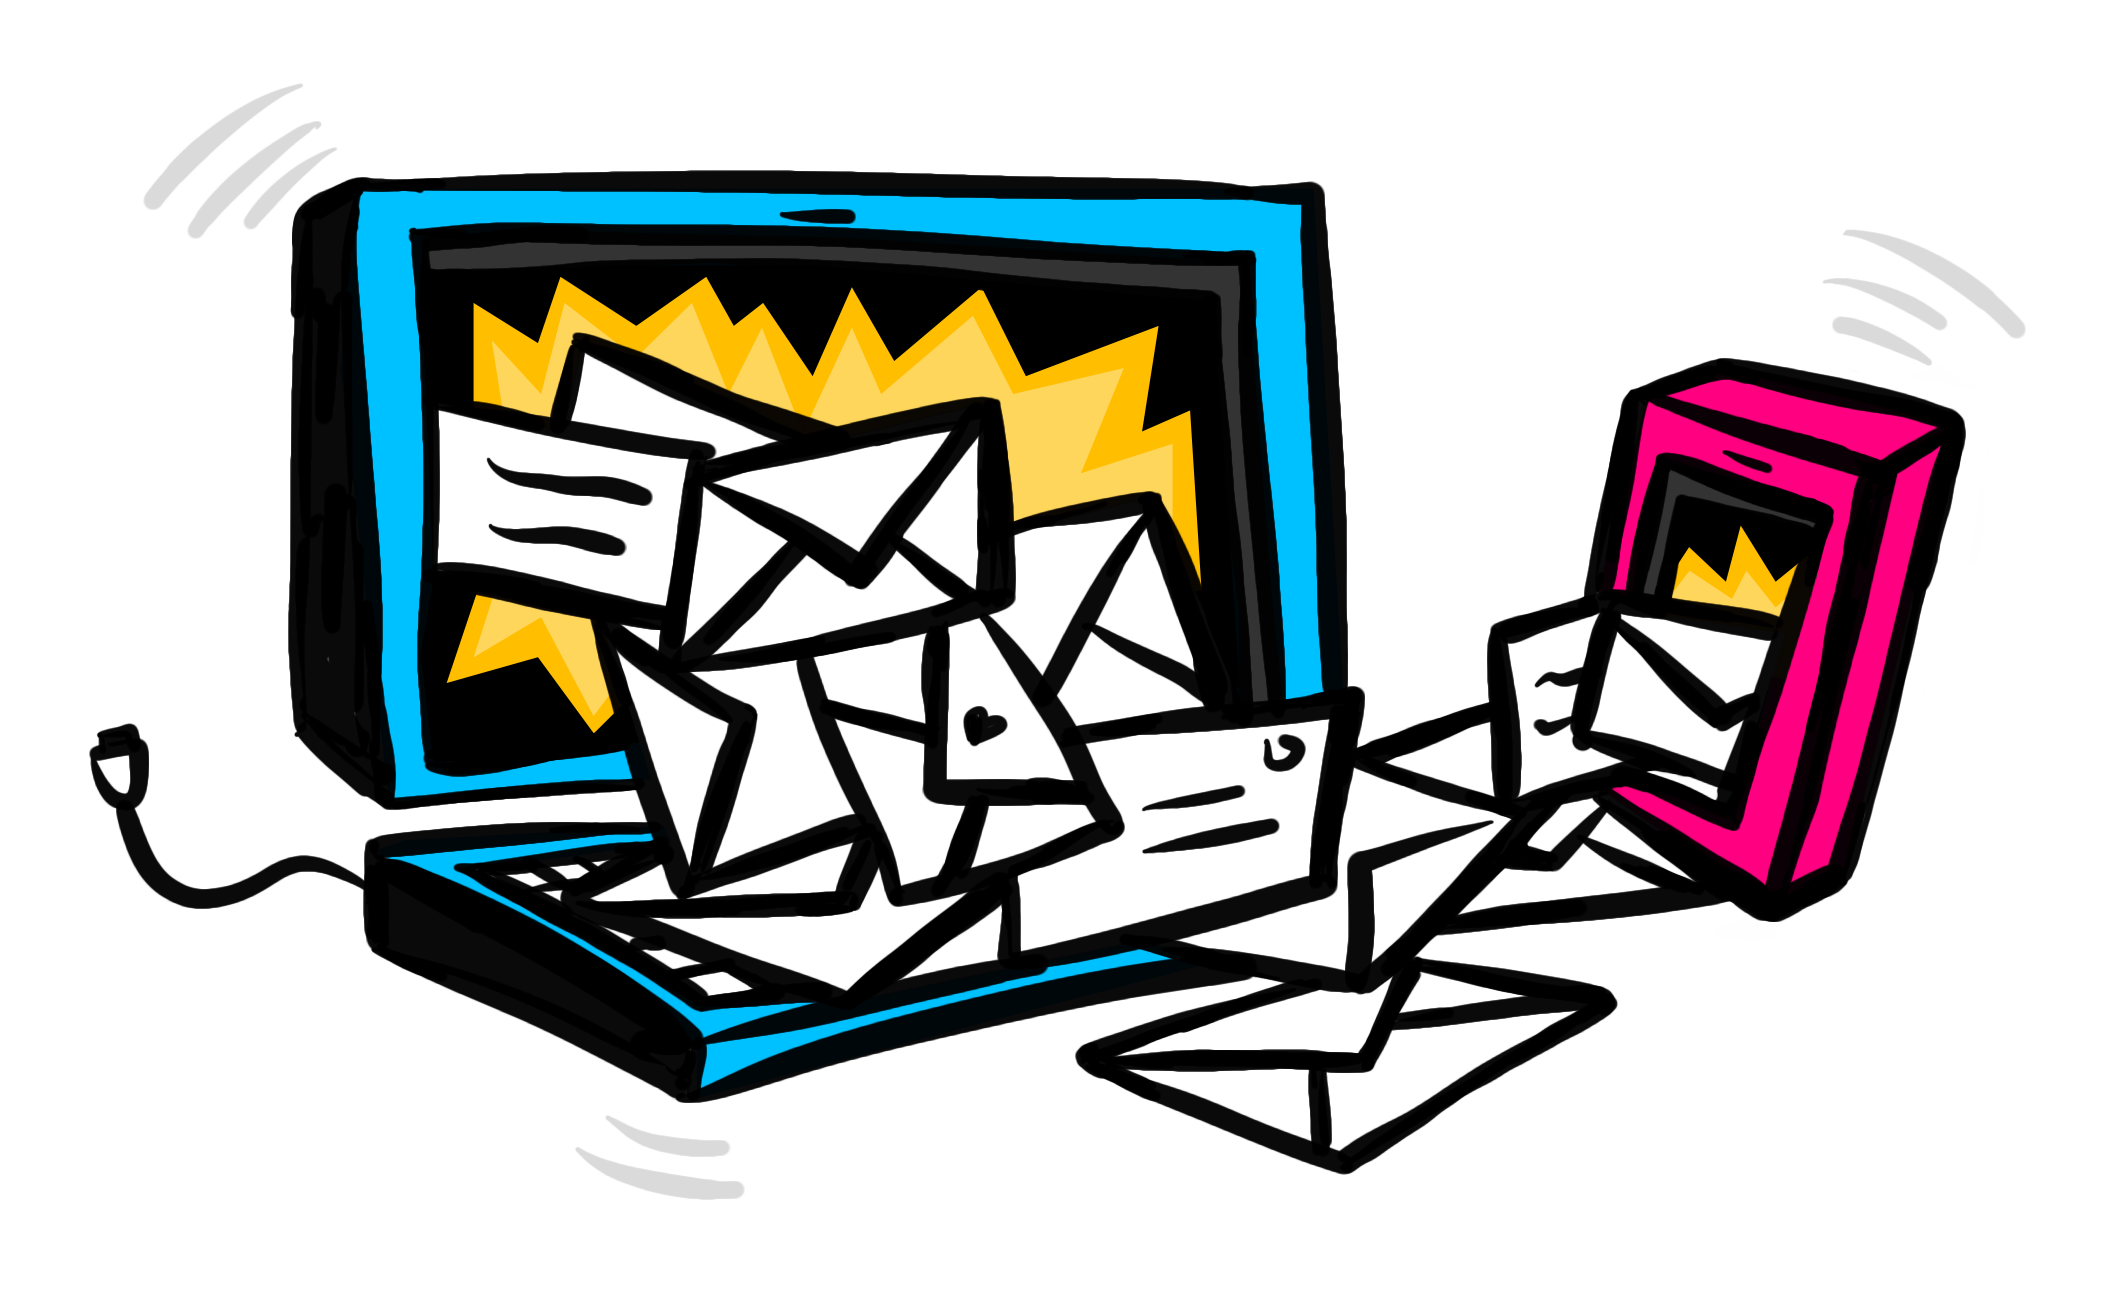 Emails pouring out of a computer display and mobile device display.